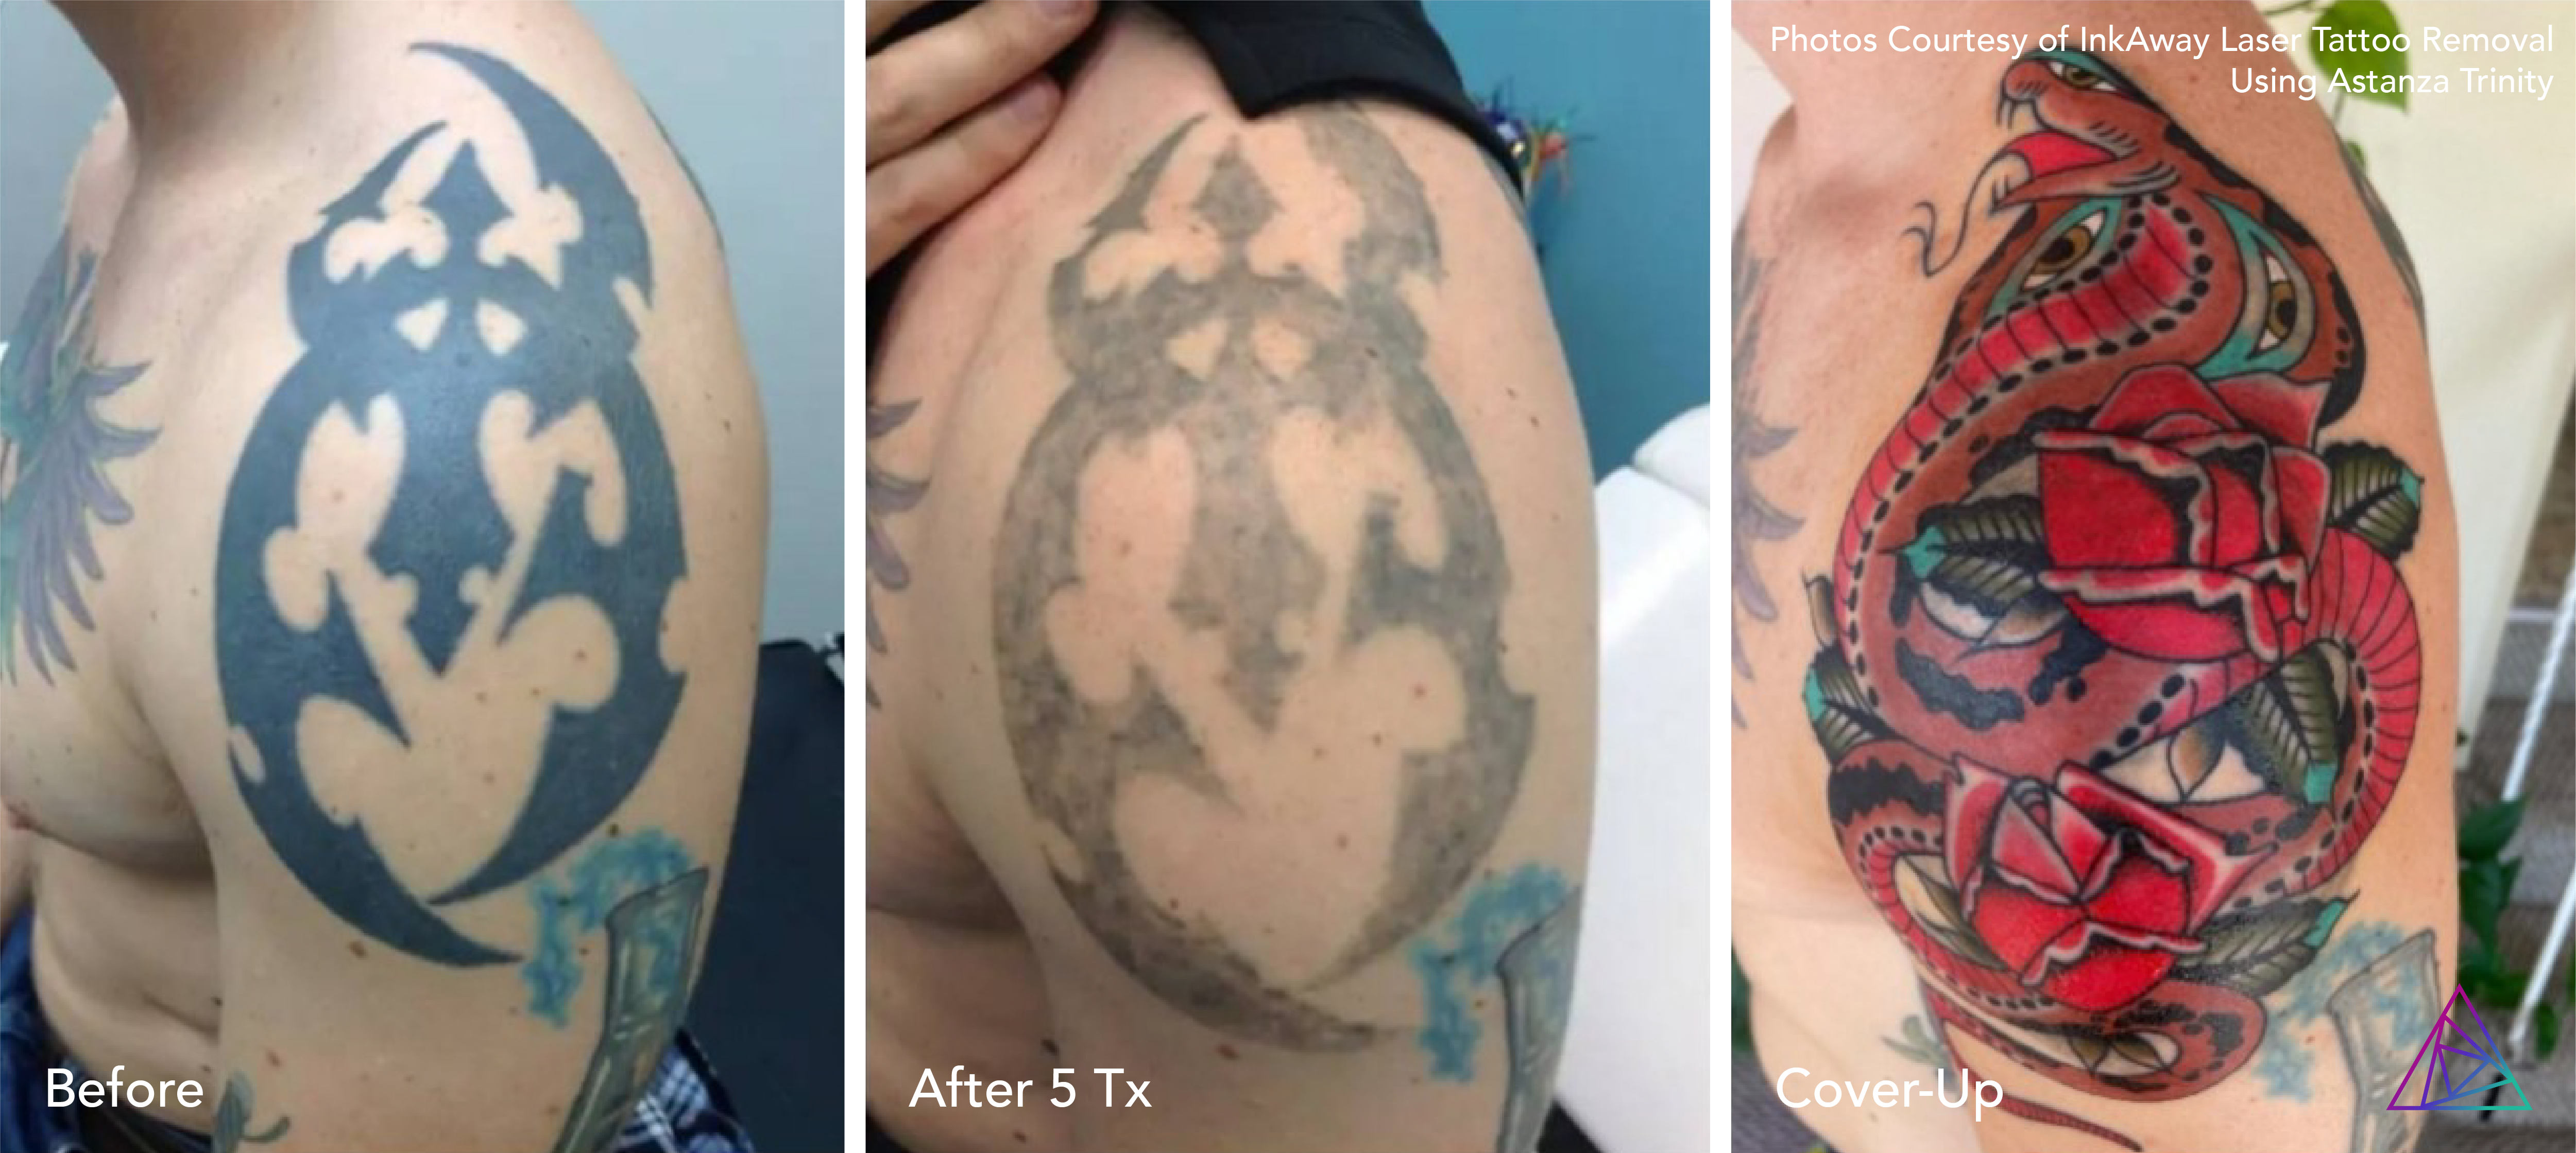 Miami Laser Tattoo Removal  Cost  Info  Arviv Medical Aesthetics